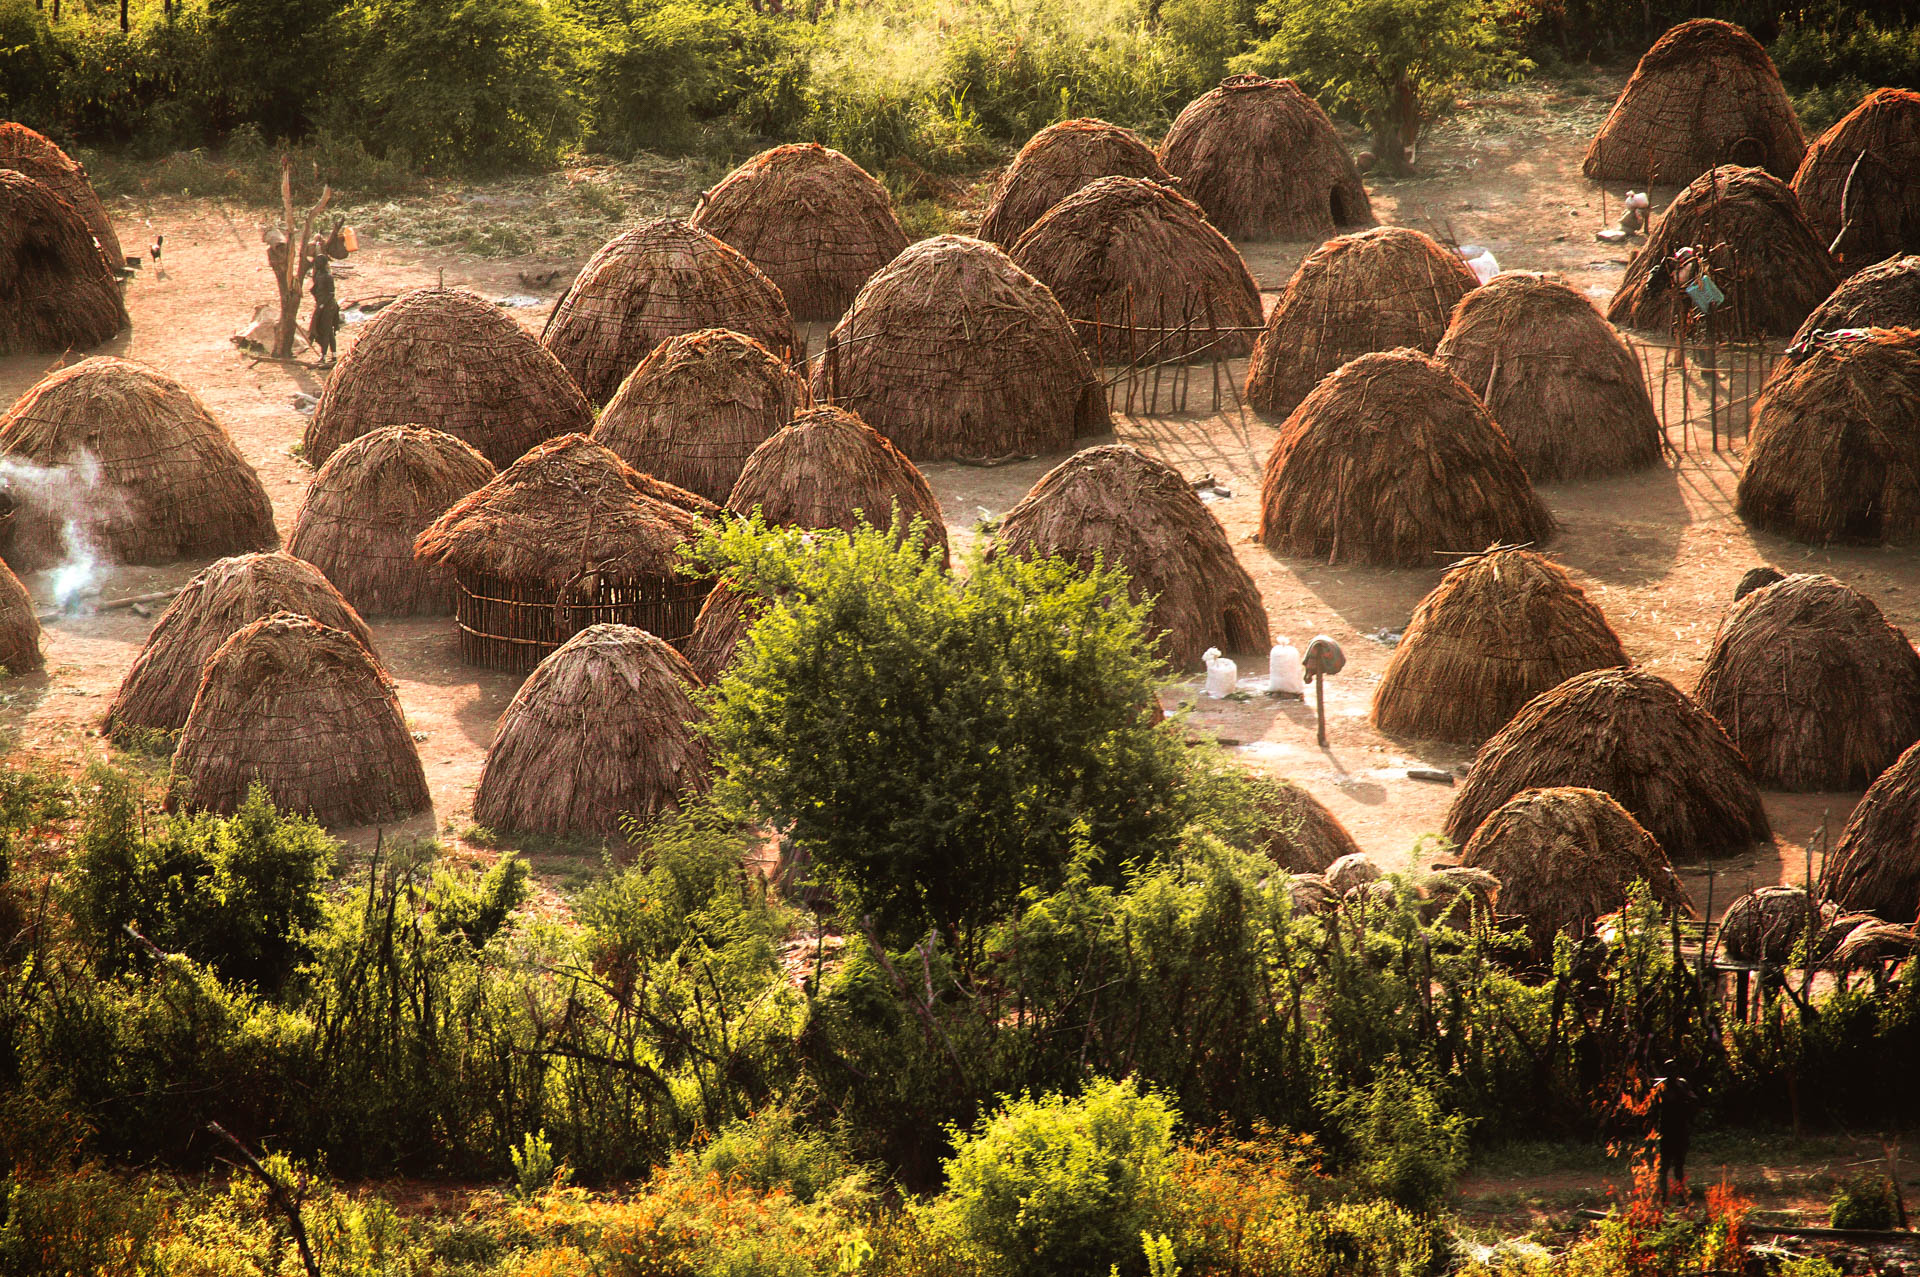  According to an ancient custom, the domed huts of the Mursi village of Komba lie together in a clearing protected by a hedge. 